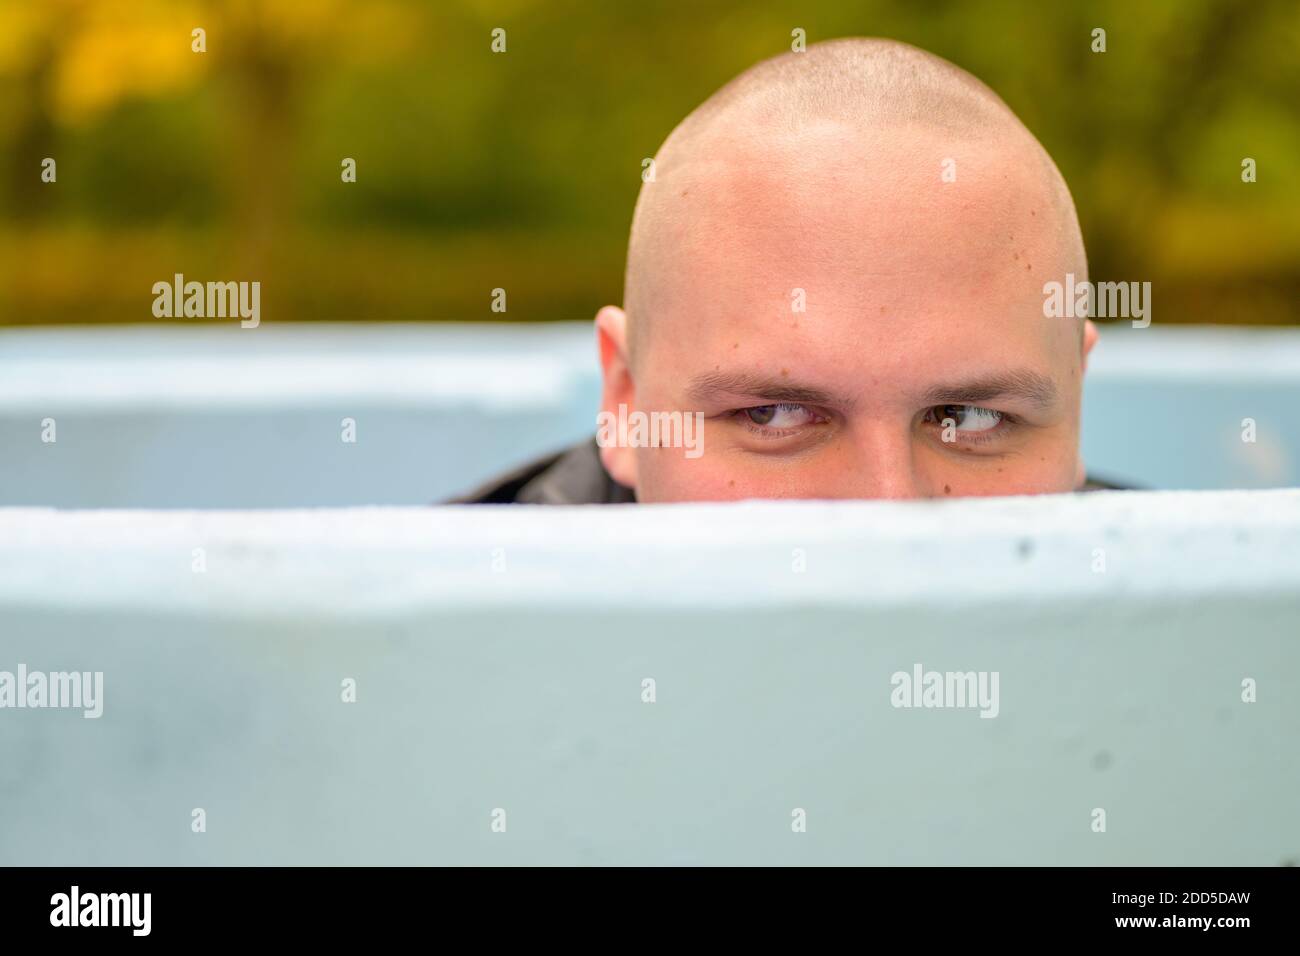 Young man with shaved head hunkering down in an outdoor tub or pool peering over the rim glancing to the side Stock Photo